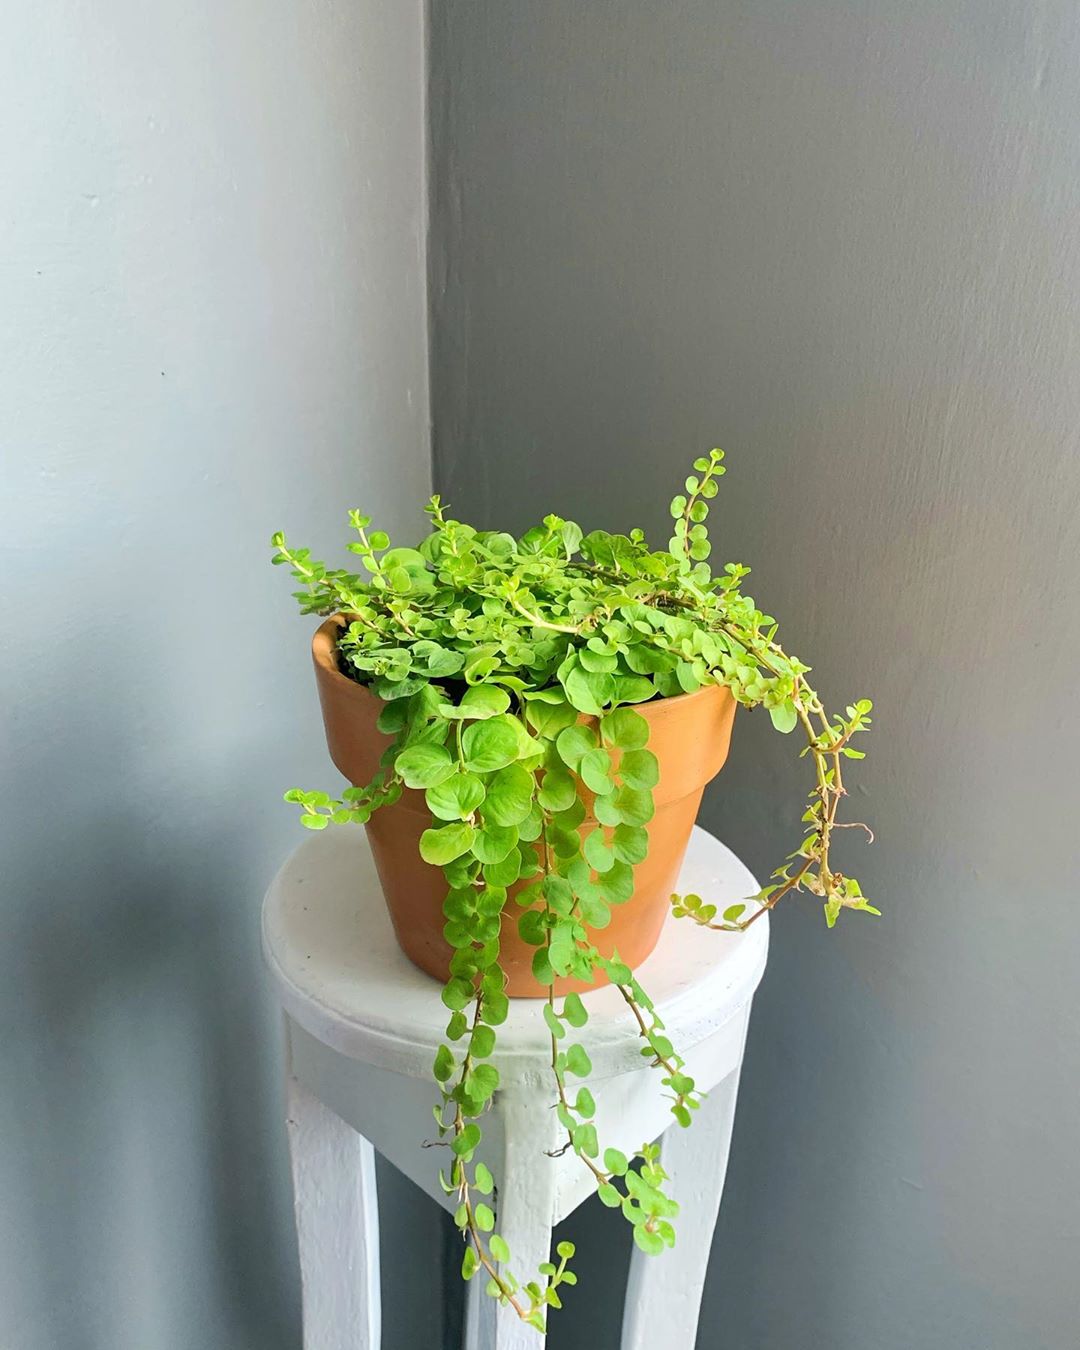 personalized creeping jenny care: water, light, nutrients | greg app